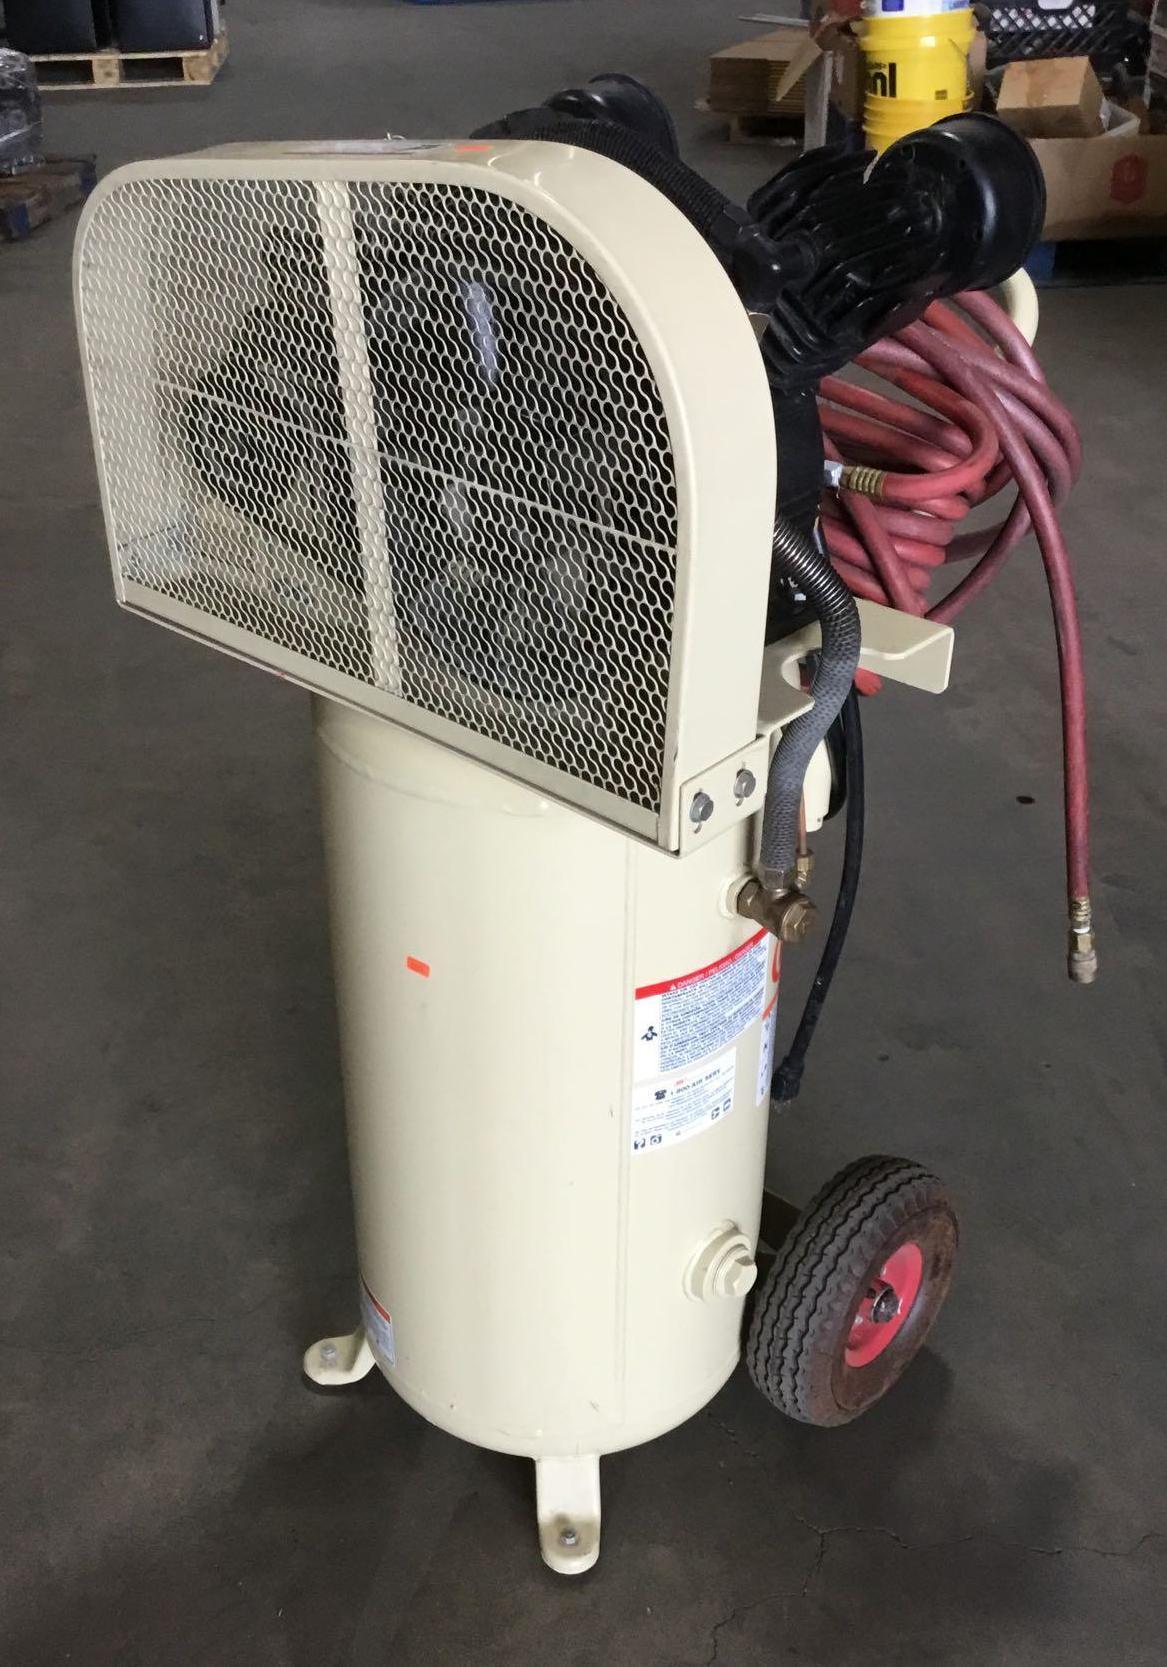 Ingersoll Rand 20 Gallon 135 PSI Air Rolling Compressor ***WORKS***